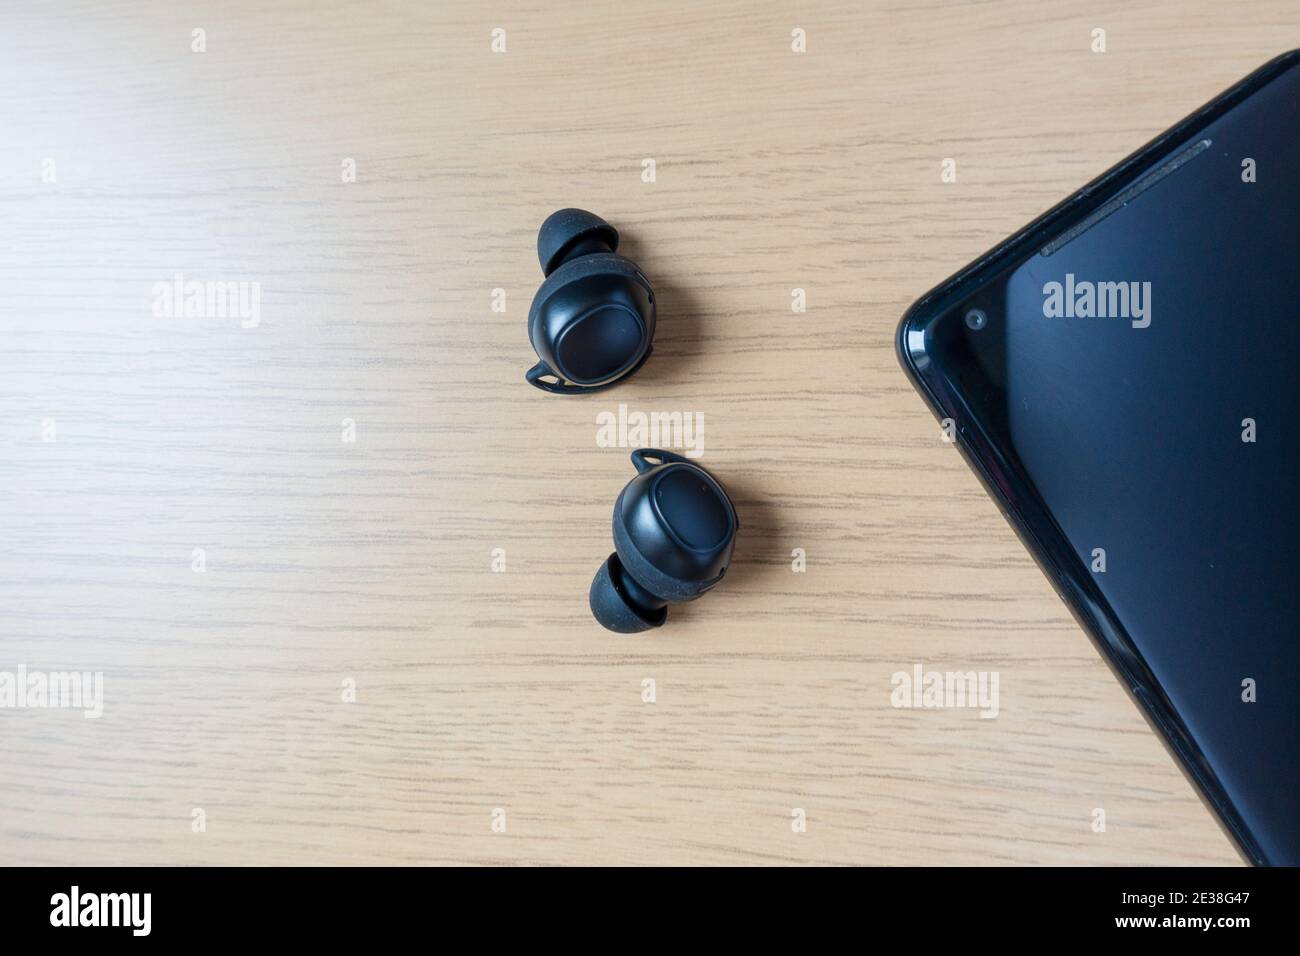 Earbuds or Ear Buds next to a phone on table Stock Photo